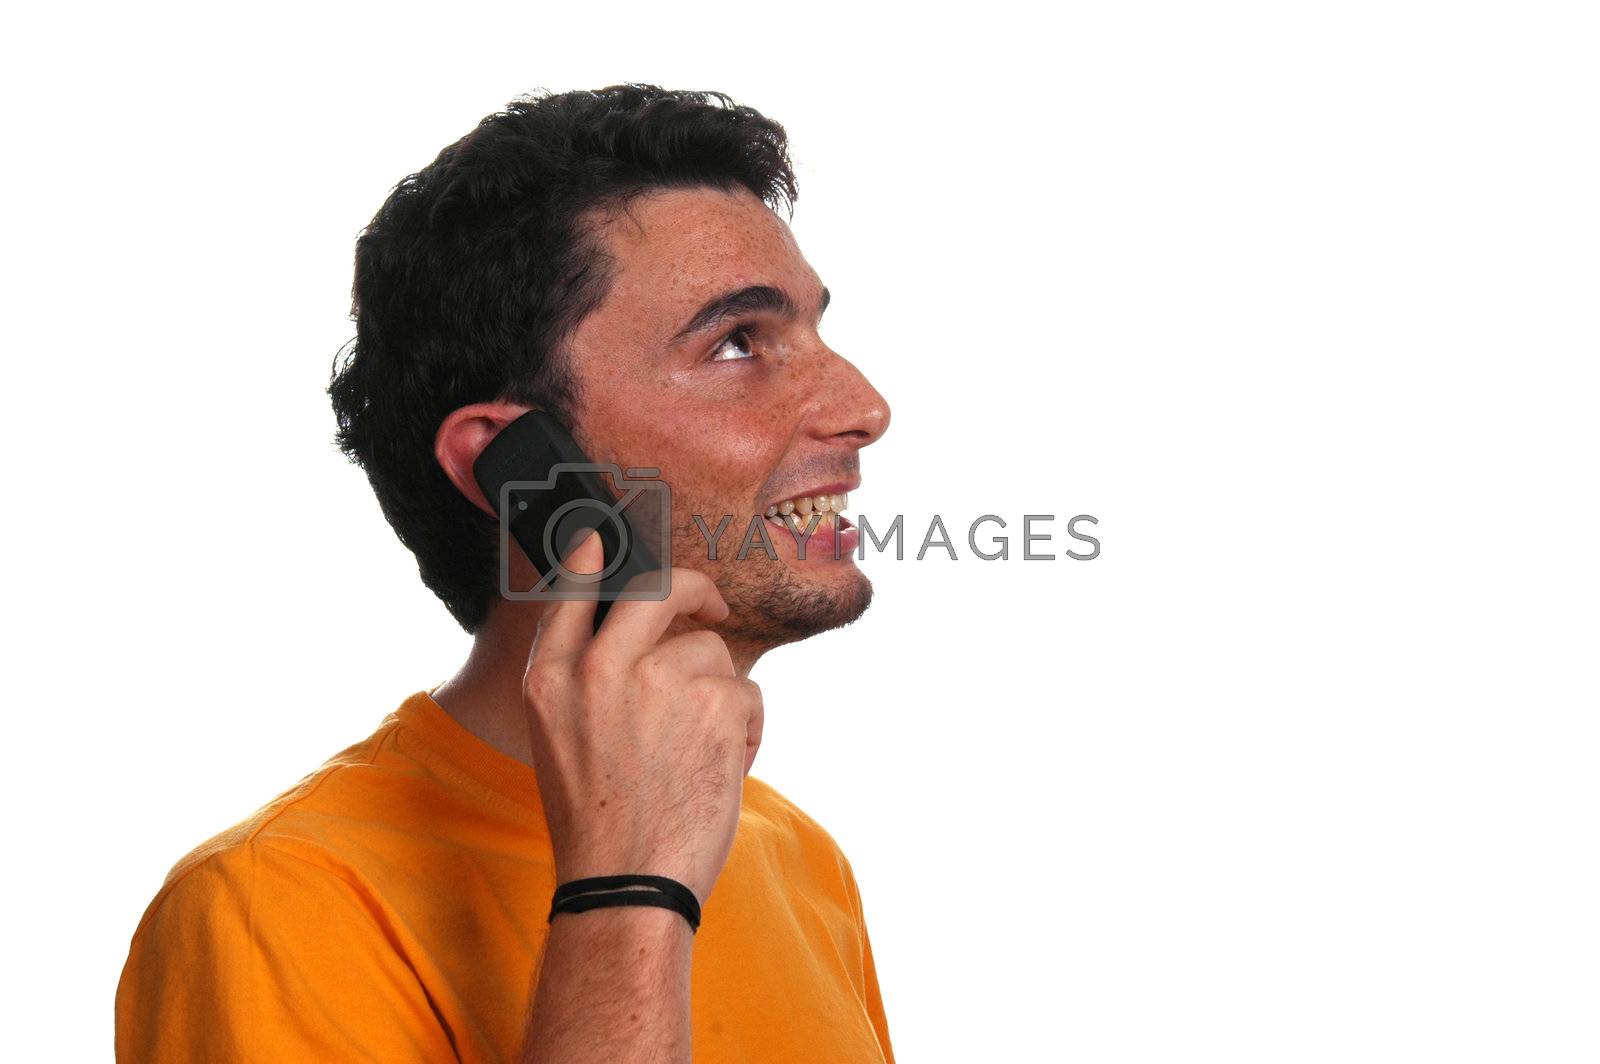 Royalty free image of friendly guy on the phone over a white background by raalves